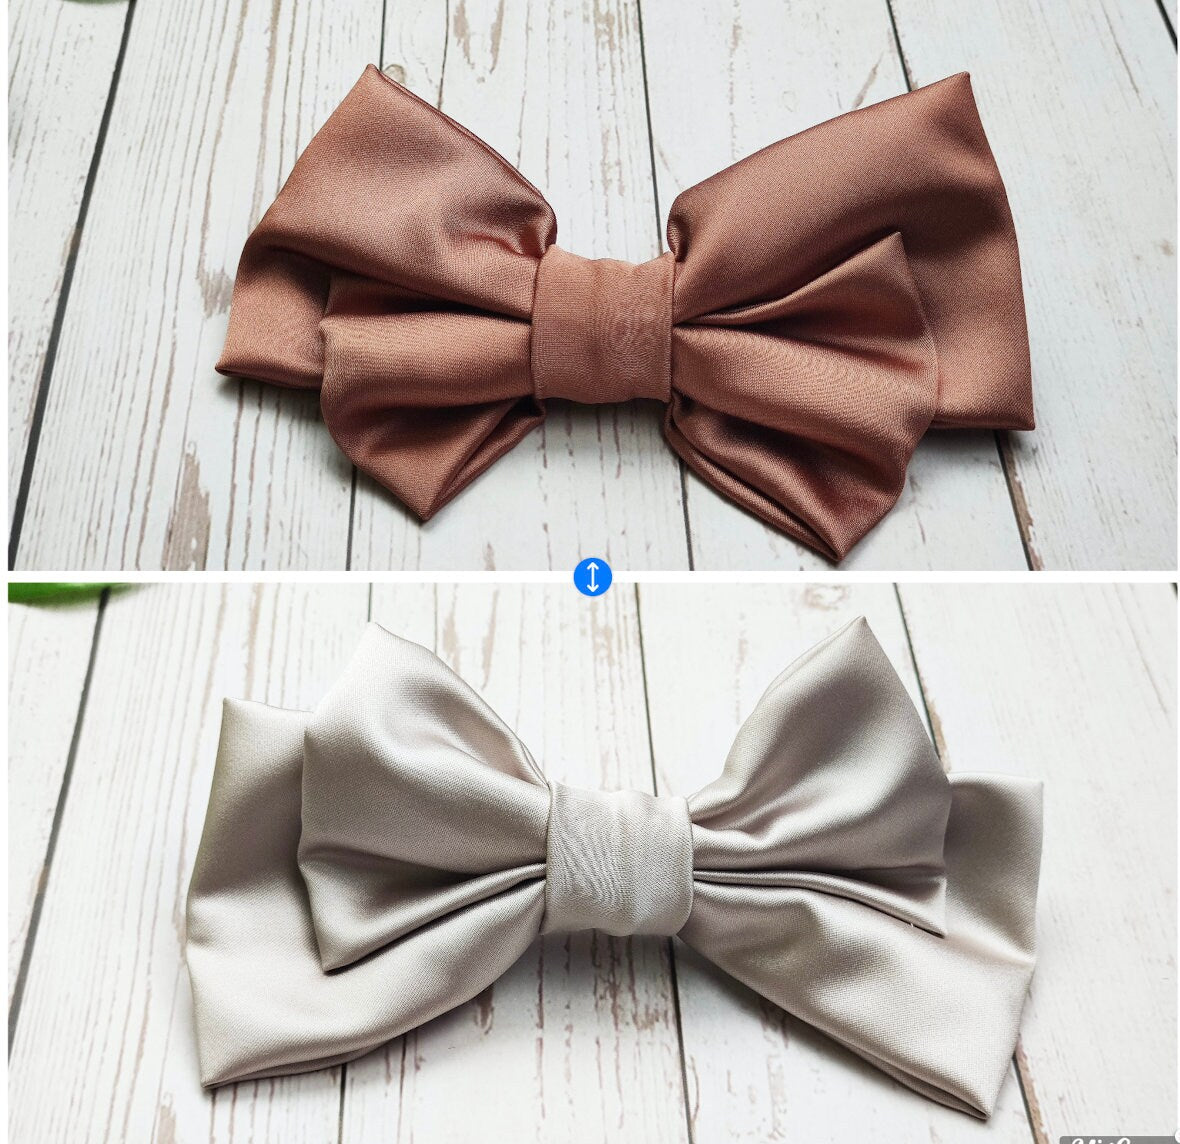 Add a touch of sophistication to your hairstyle with these handmade brick and beige satin hair clips with a bow. The fashionable hair accessory is perfect for adding a touch of style to any outfit and is great for keeping your hair in place.